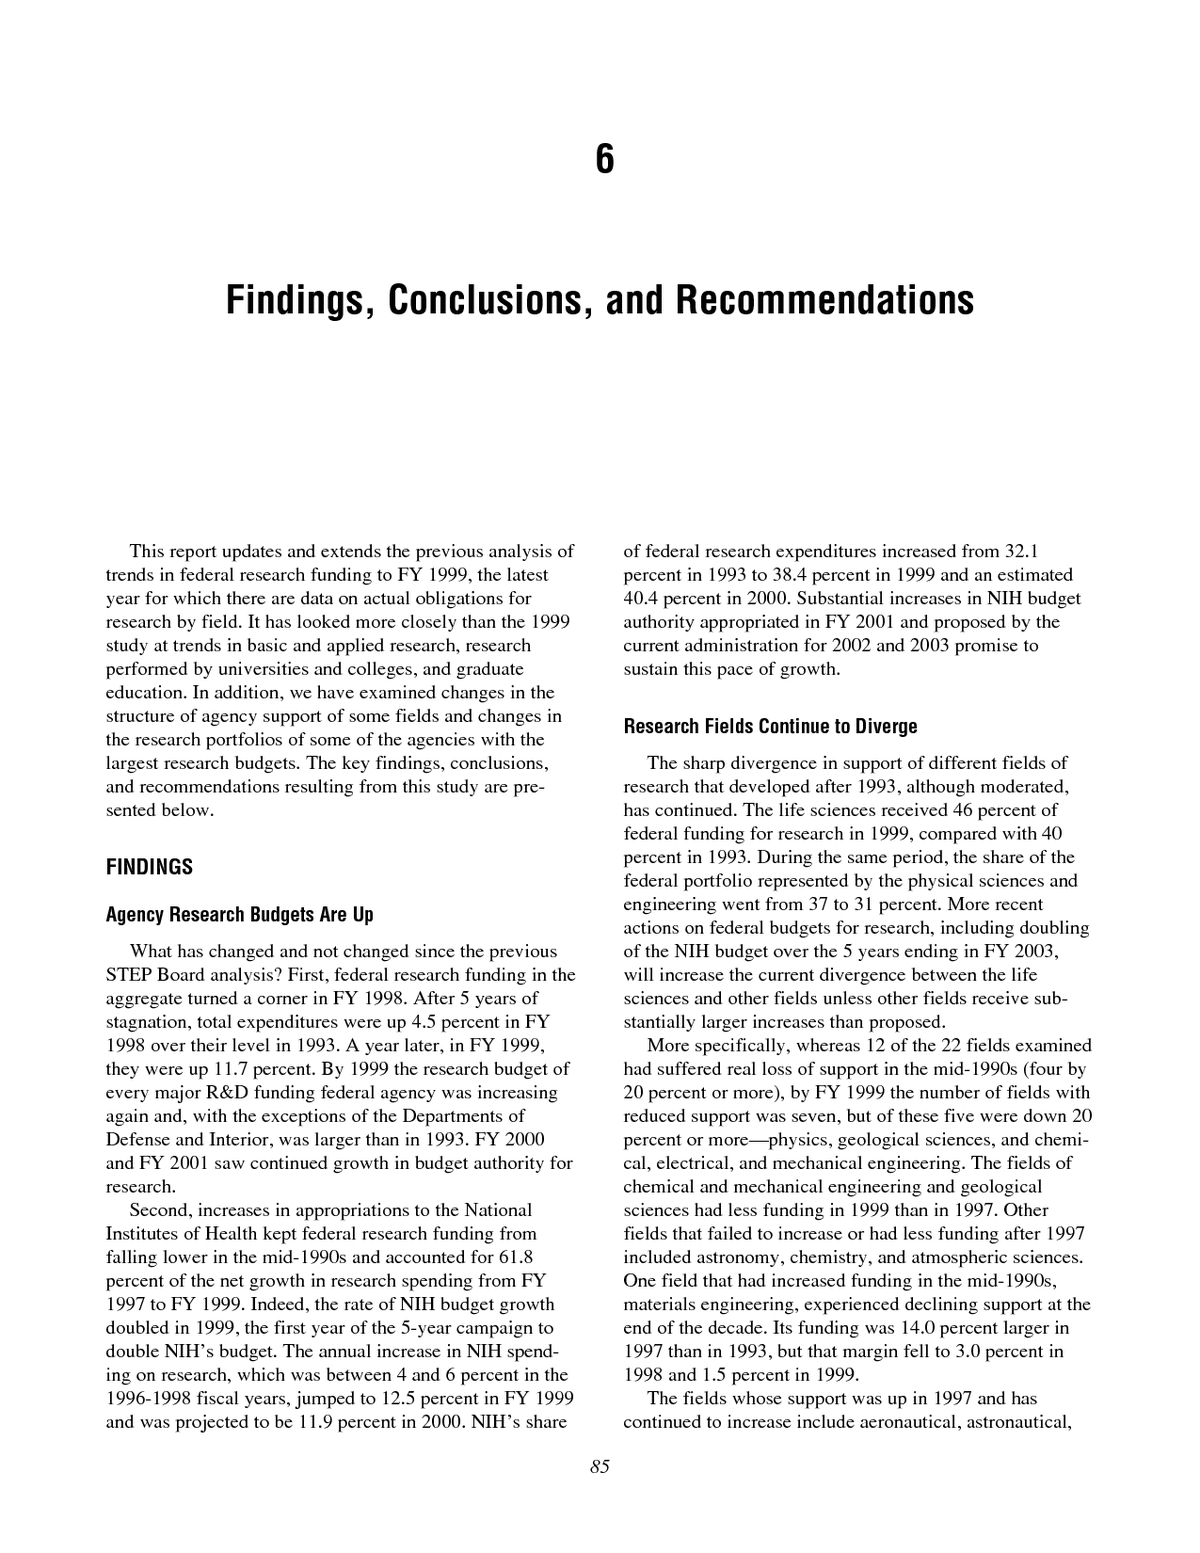 summary of findings conclusion and recommendation in research